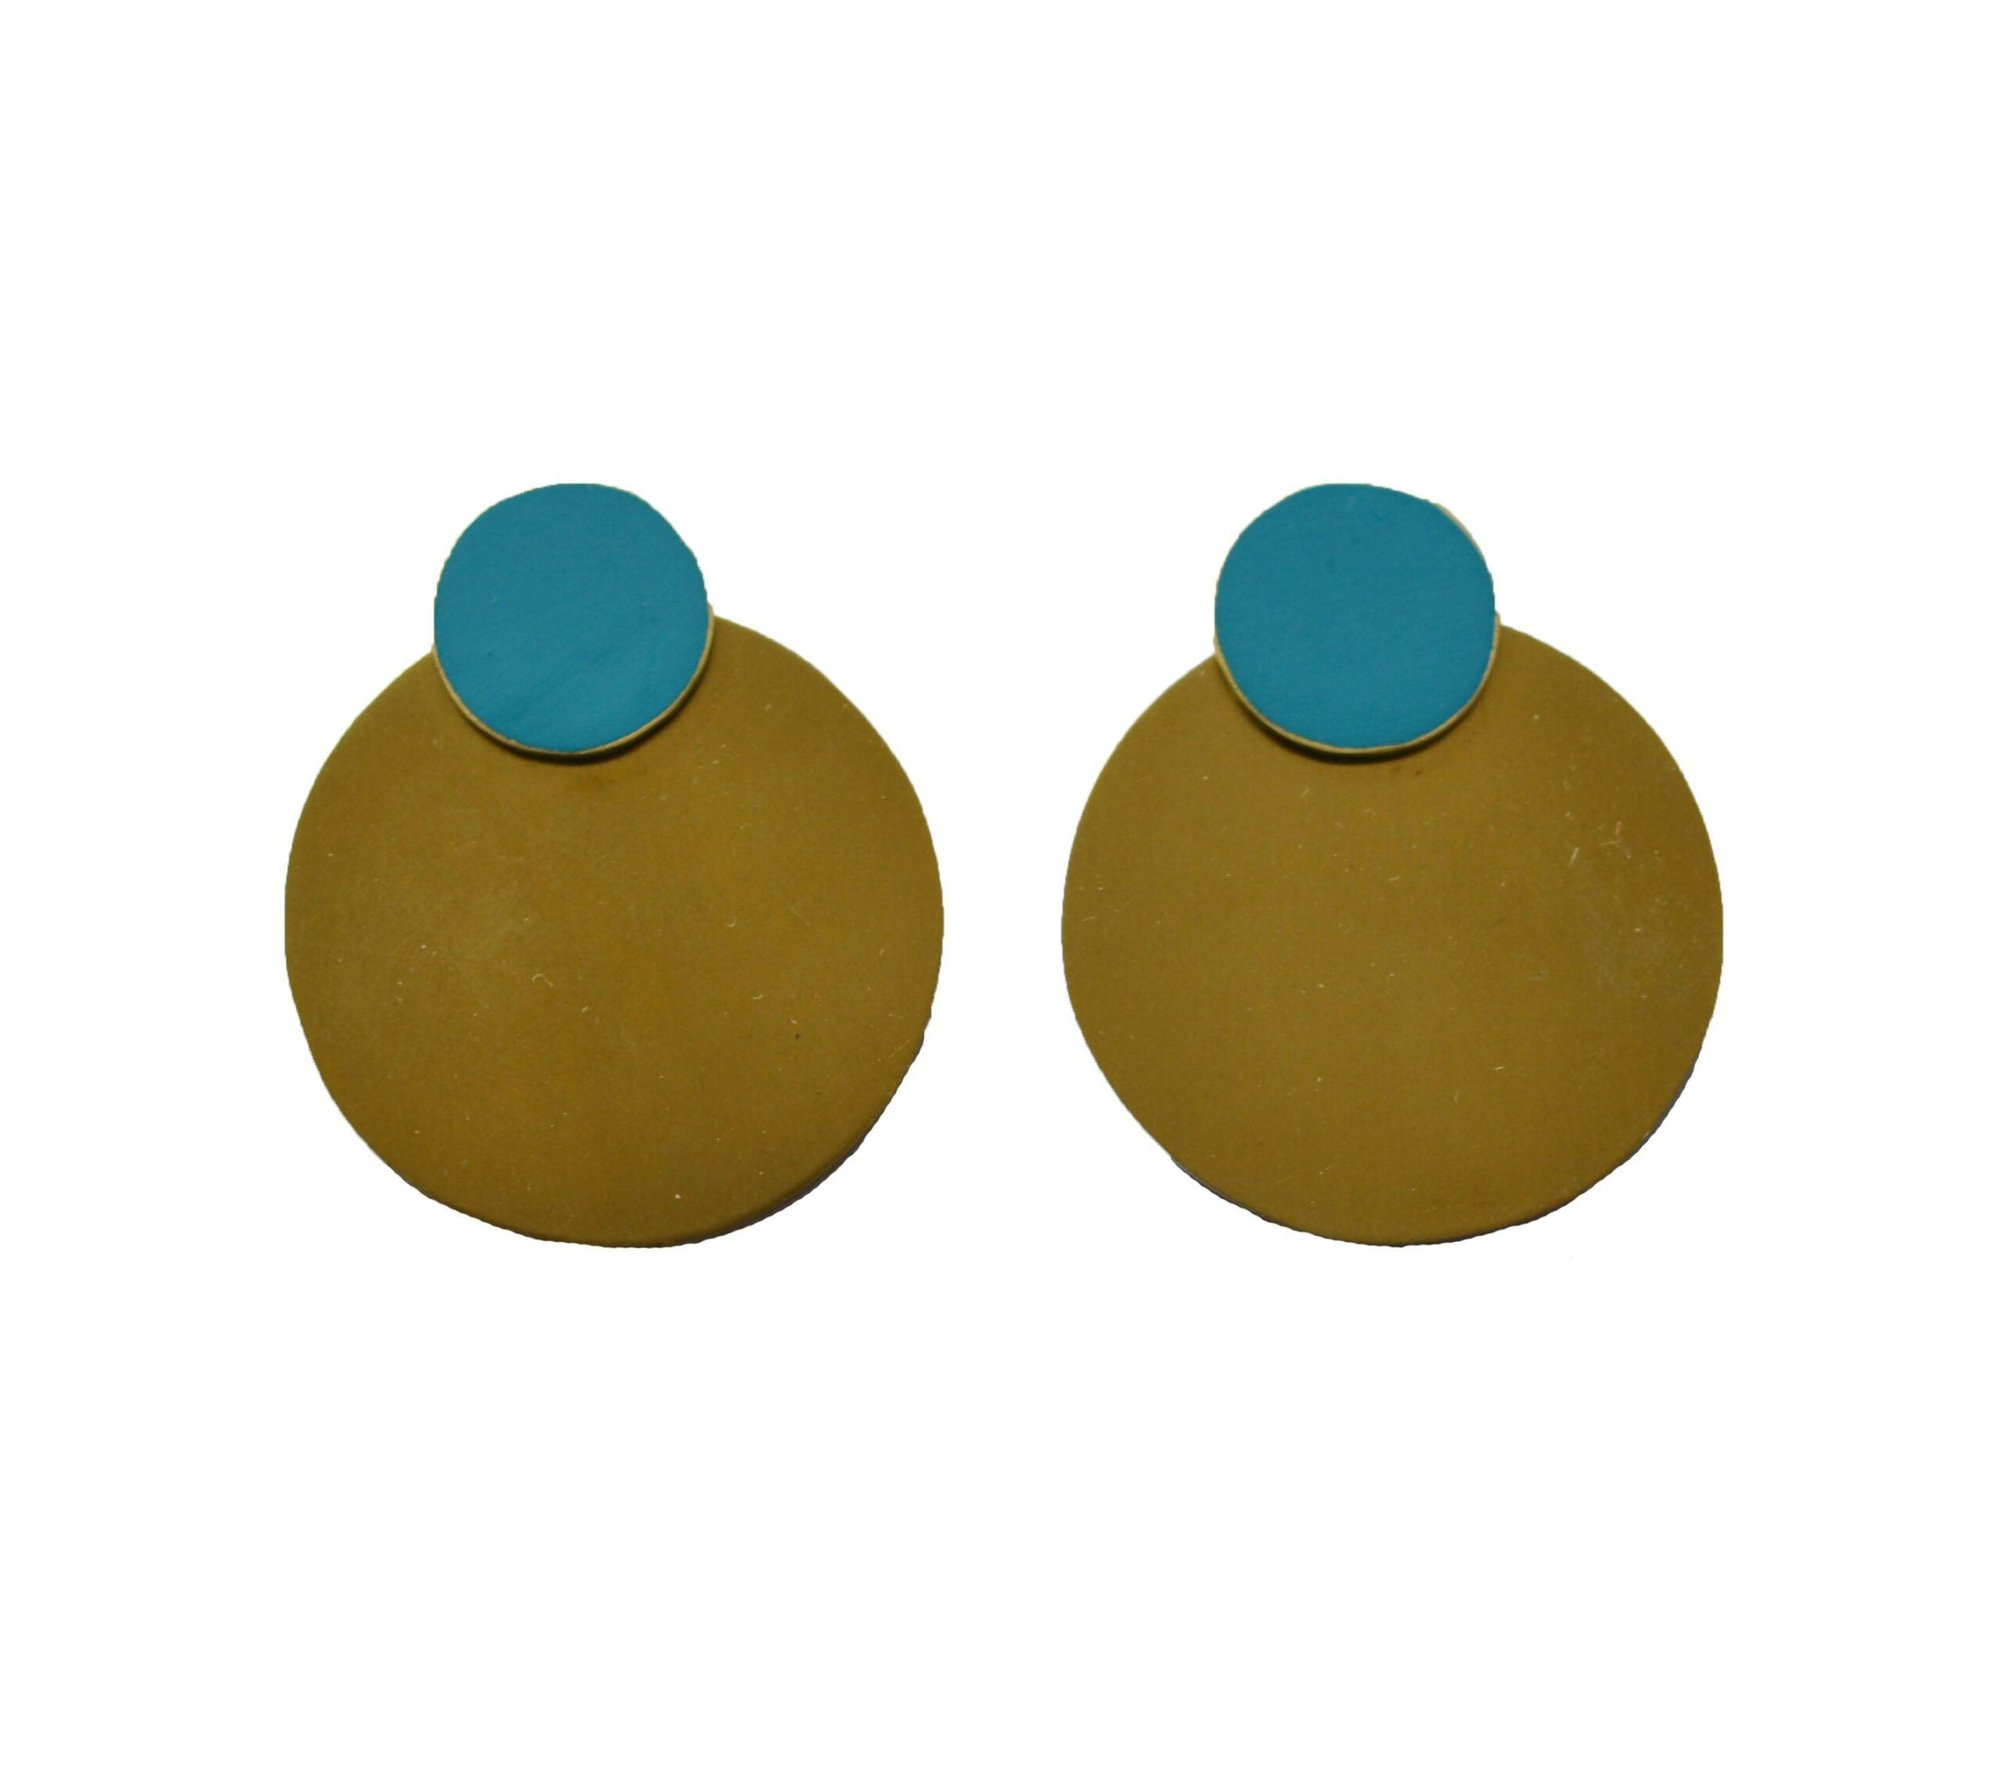 Lis Exclusive Coloured Round Statement Earrings - Teal